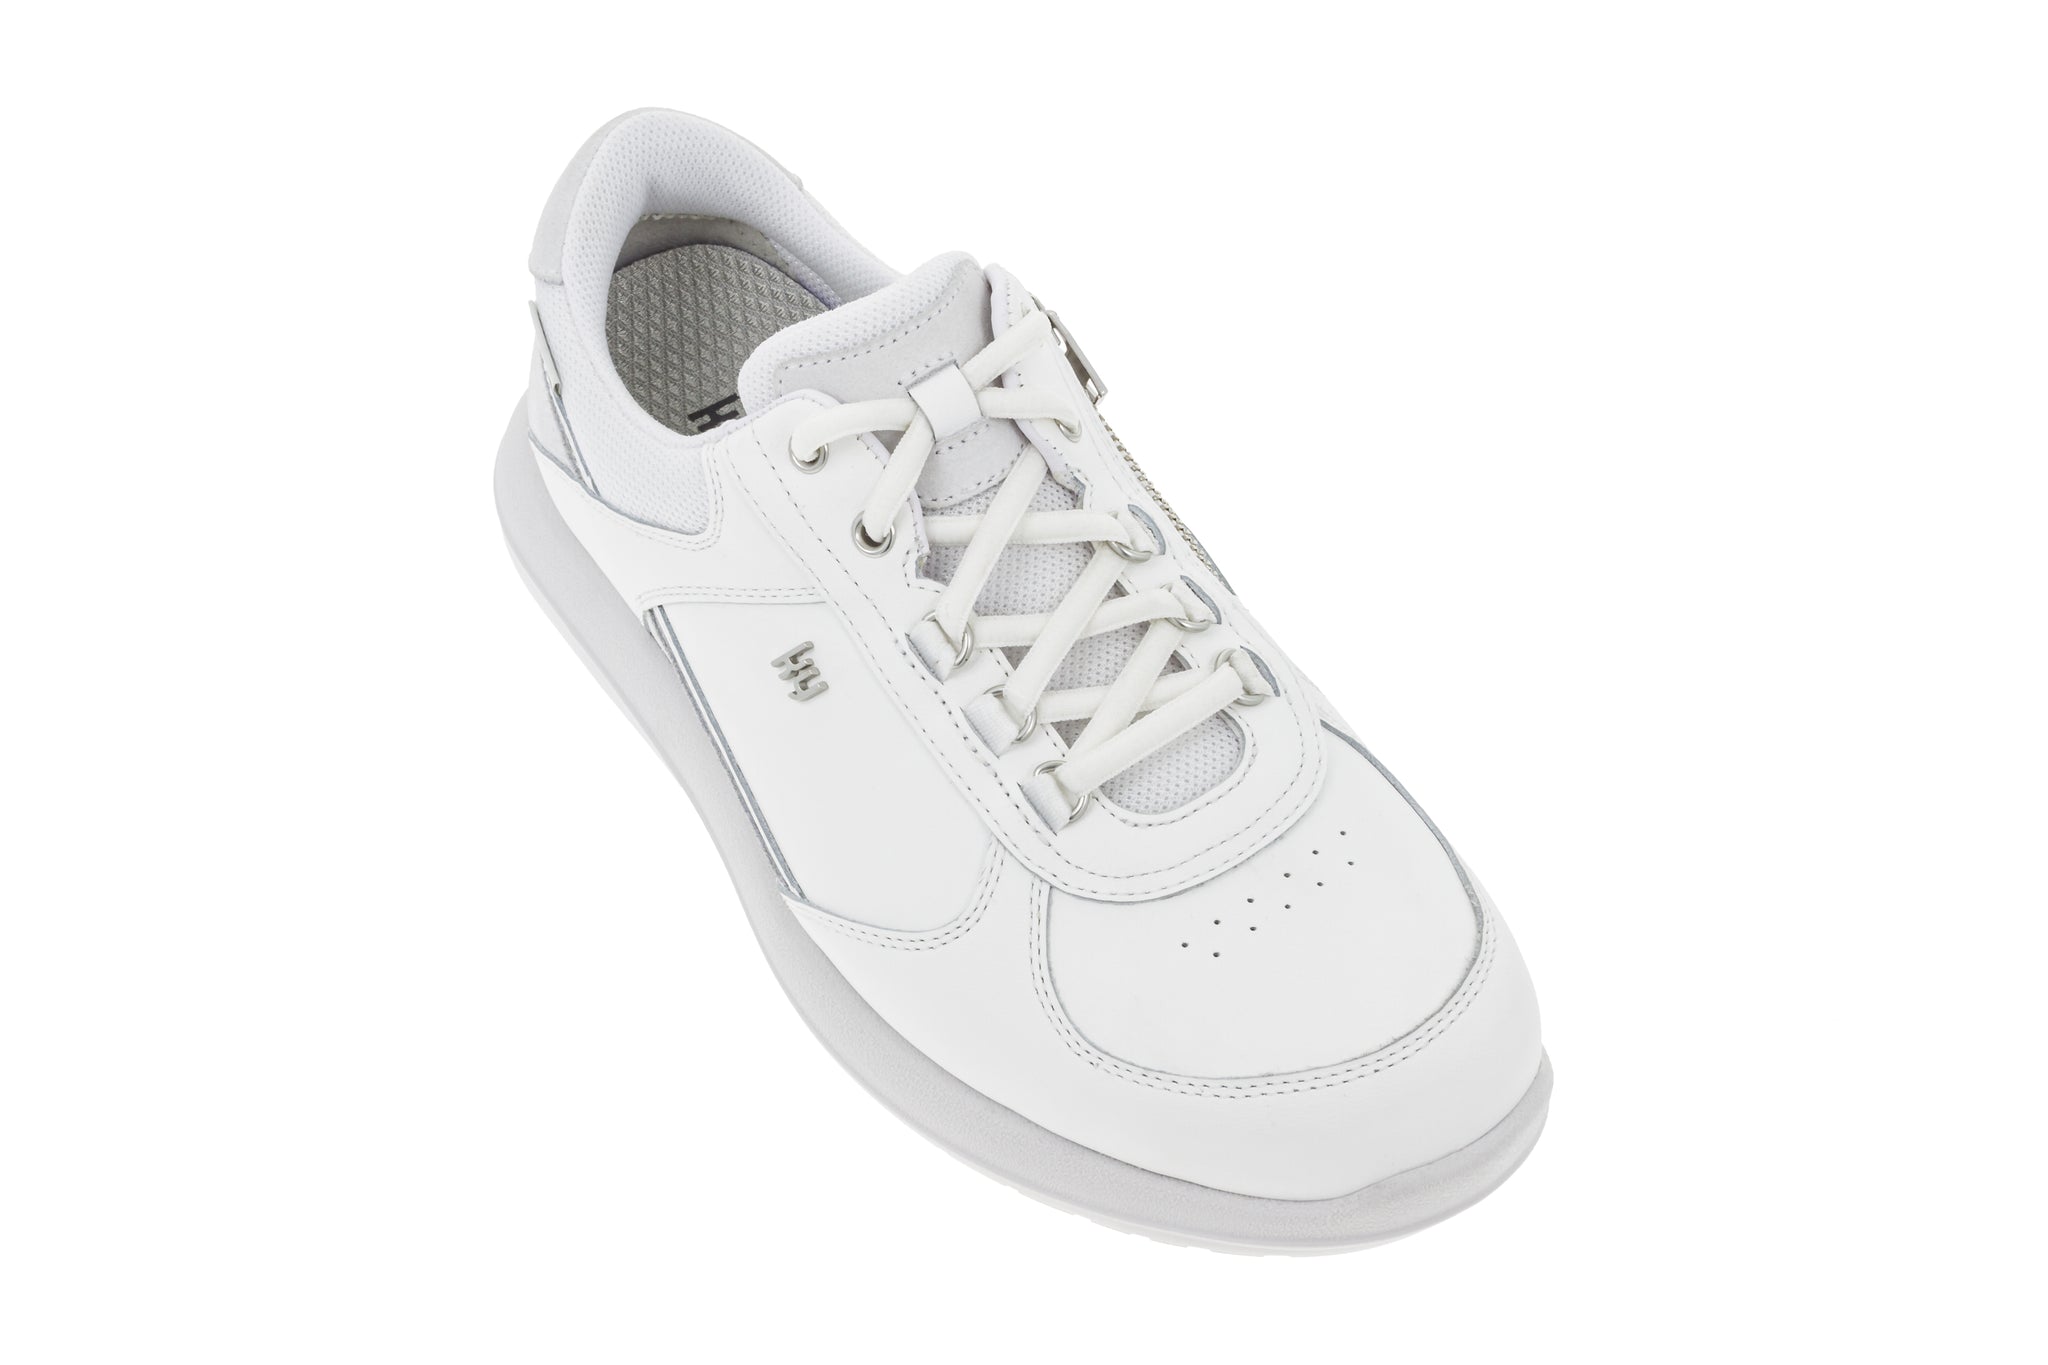 store Rolle Swiss kybun Relief USA Shoe for – Pain online White: kybun Air-Cushion